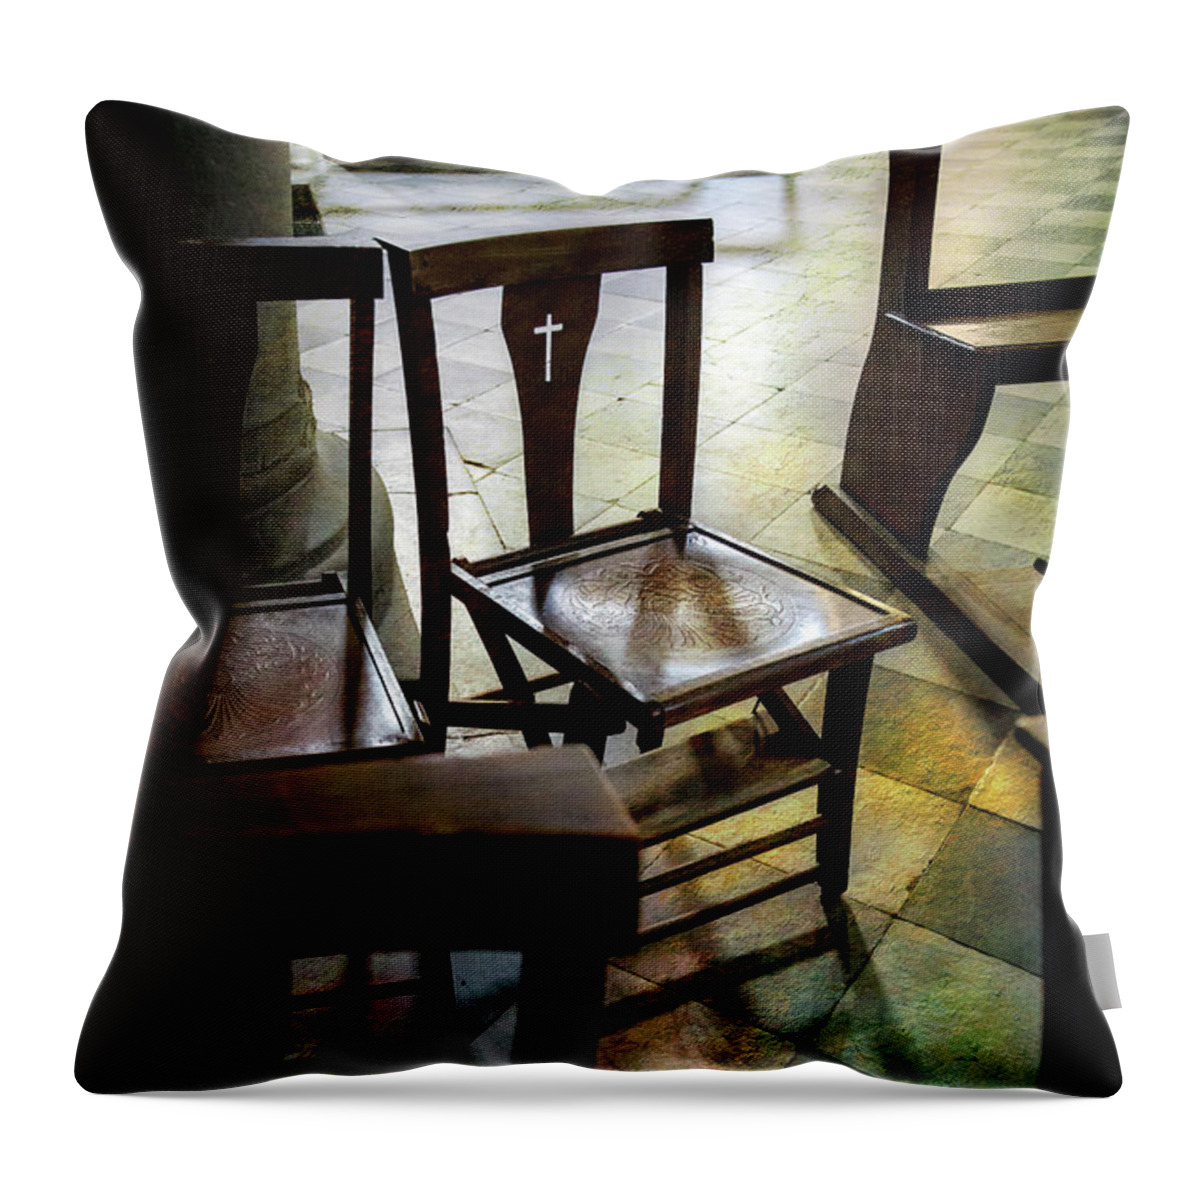 Tranquility Throw Pillow featuring the photograph God's Chair by Craig J Satterlee